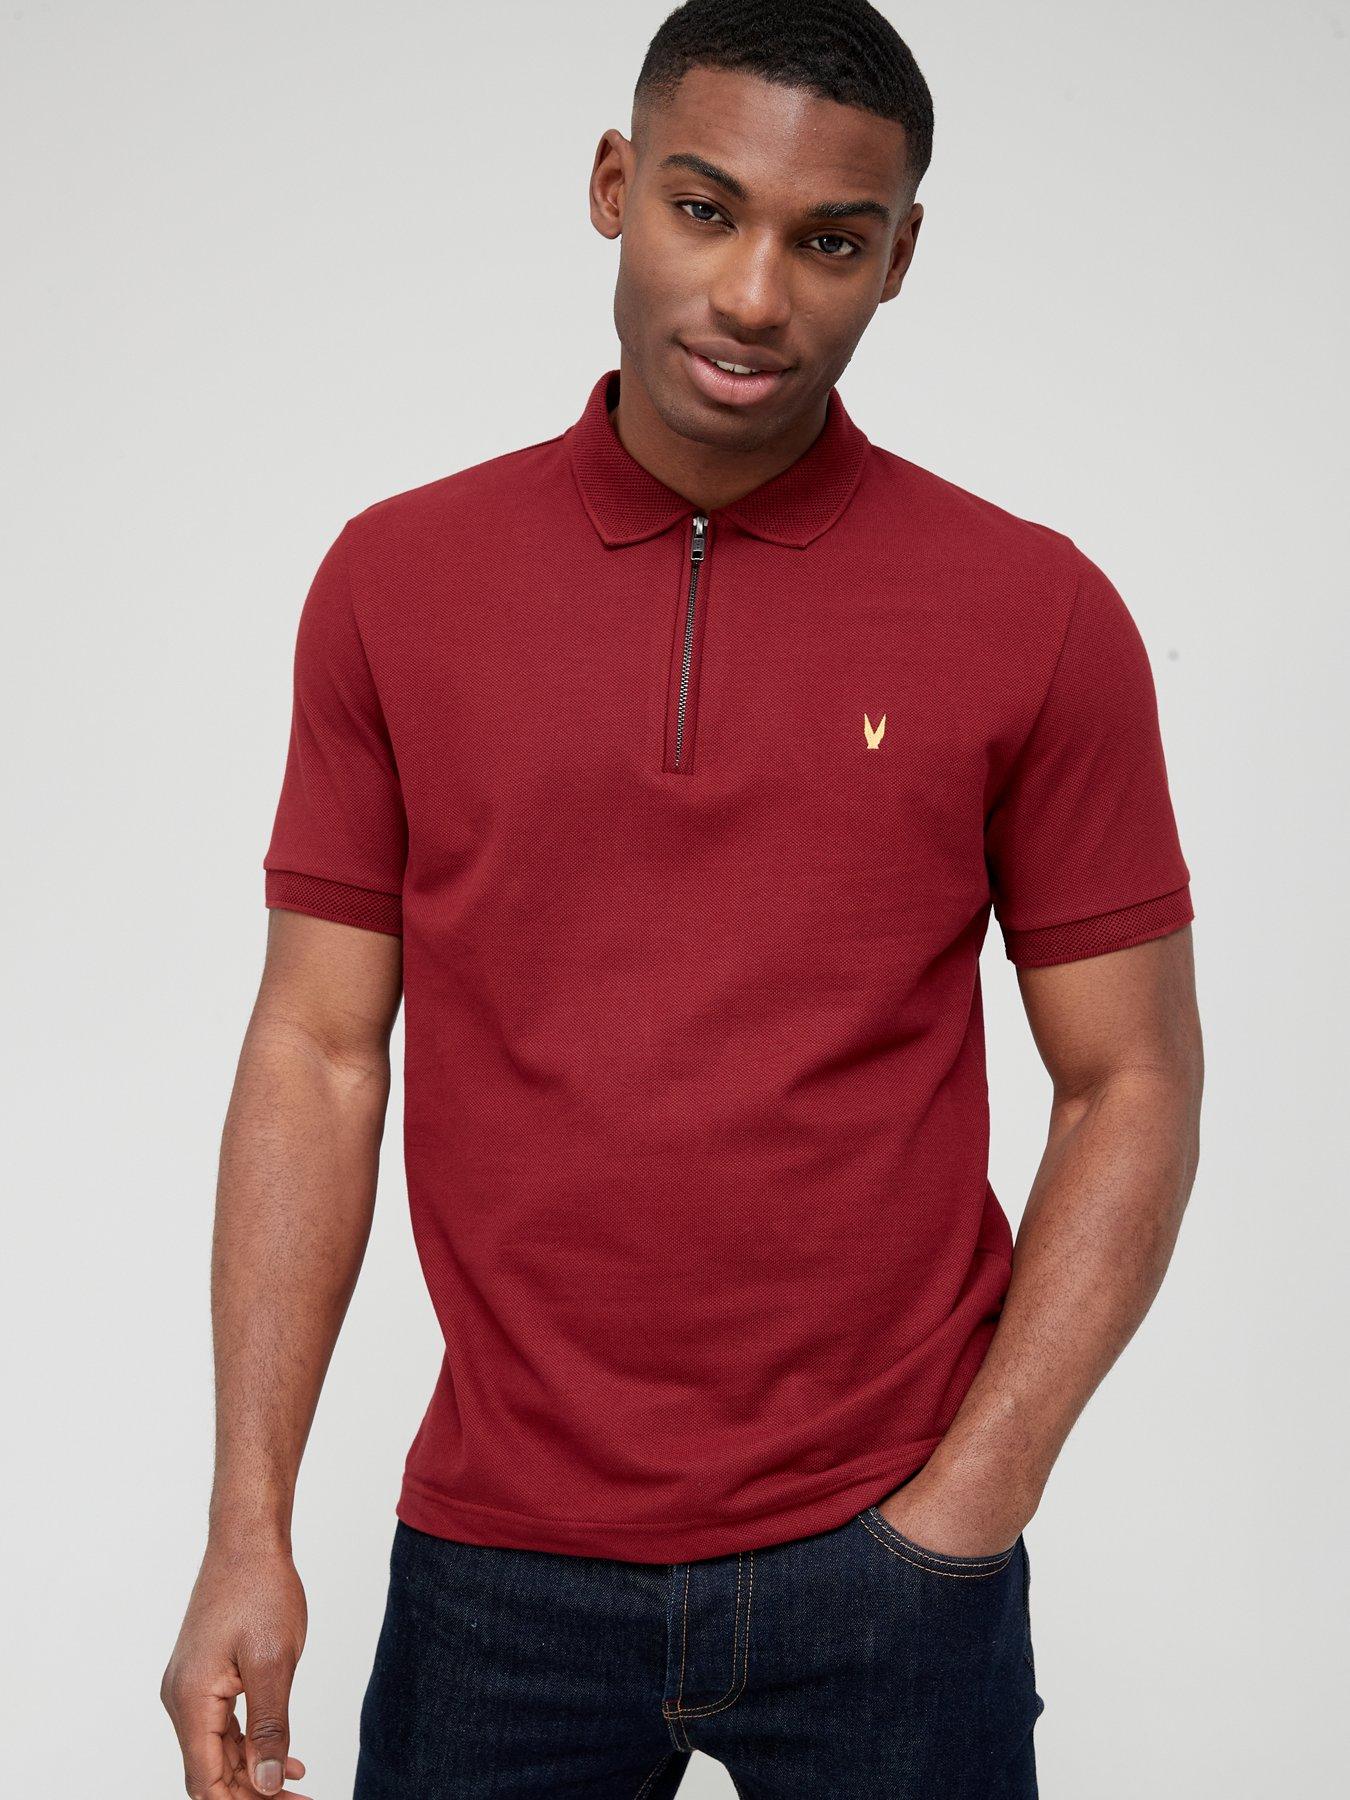 YONG-SHOP Awesome Since June 1969 Mens Regular-Fit Cotton Polo Shirt 